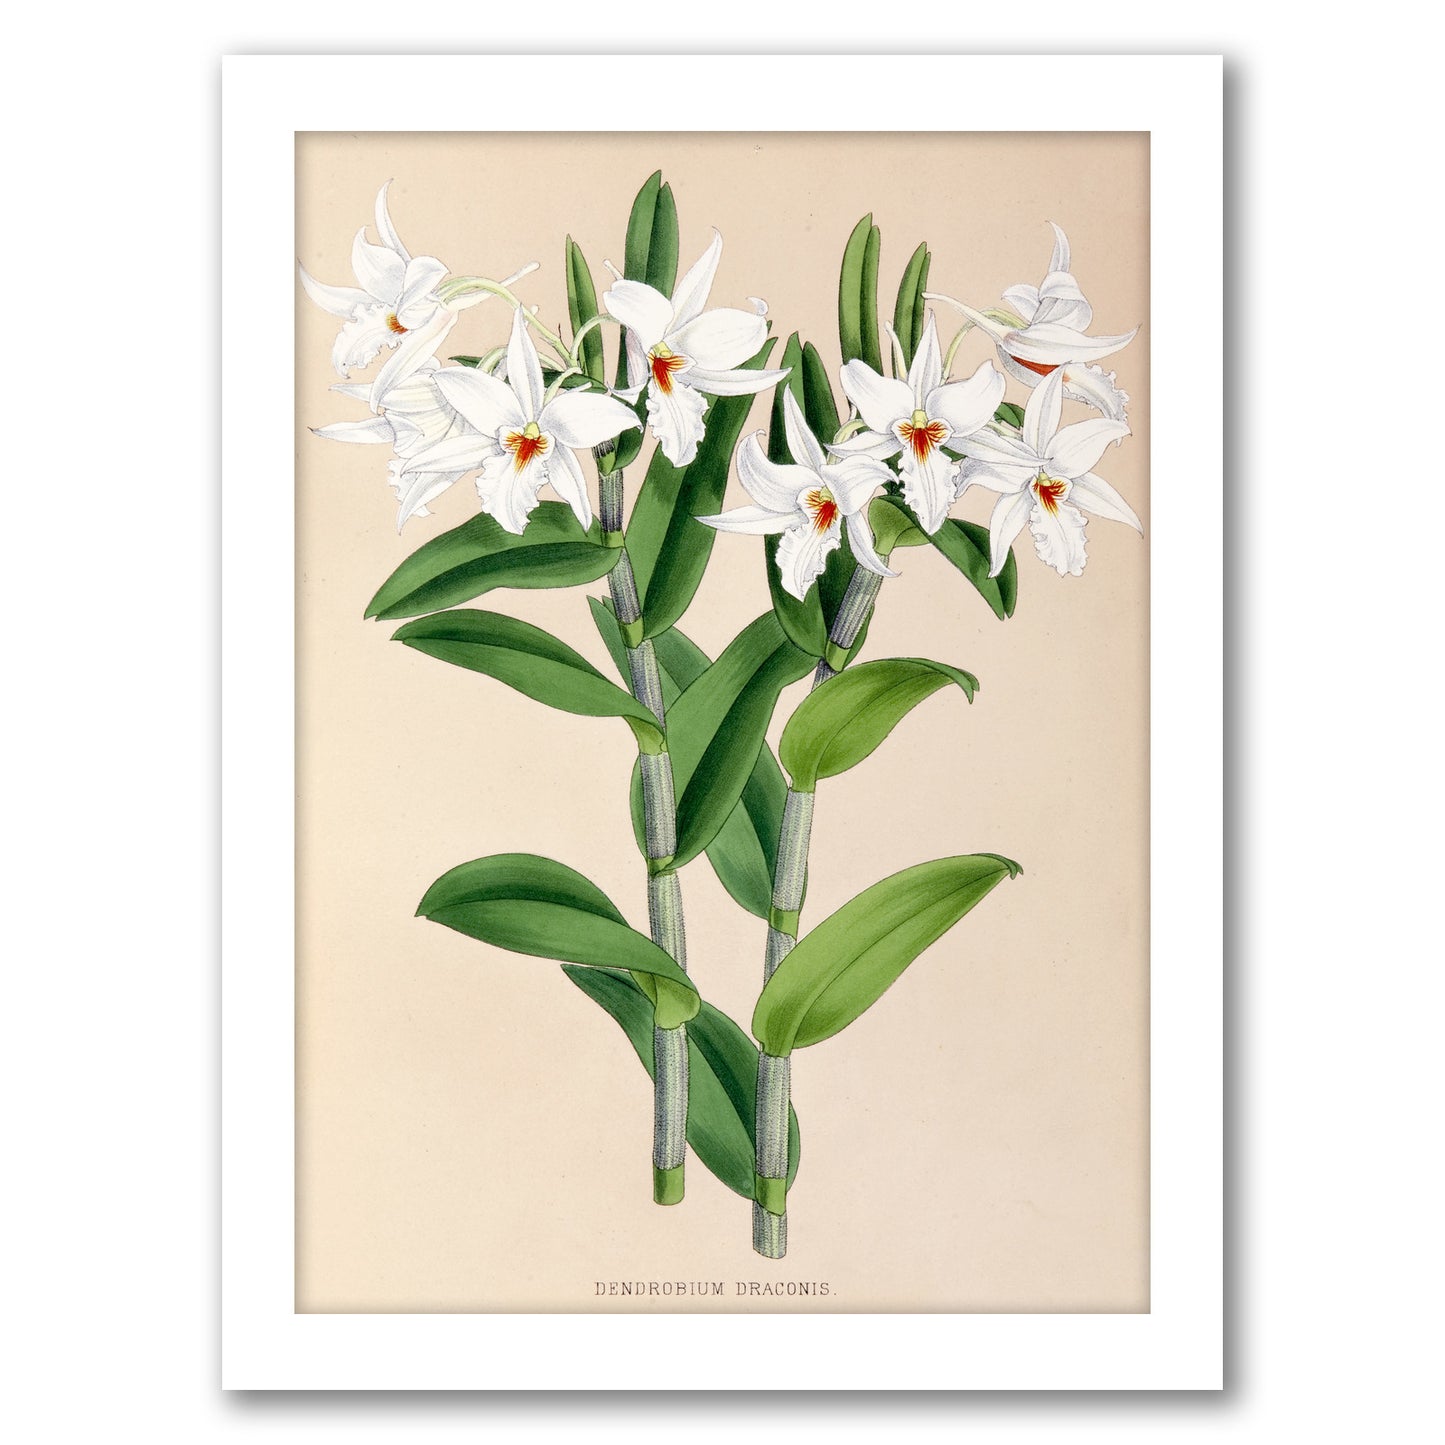 Fitch Orchid Dendrobium Draconis by New York Botanical Garden - Framed Print